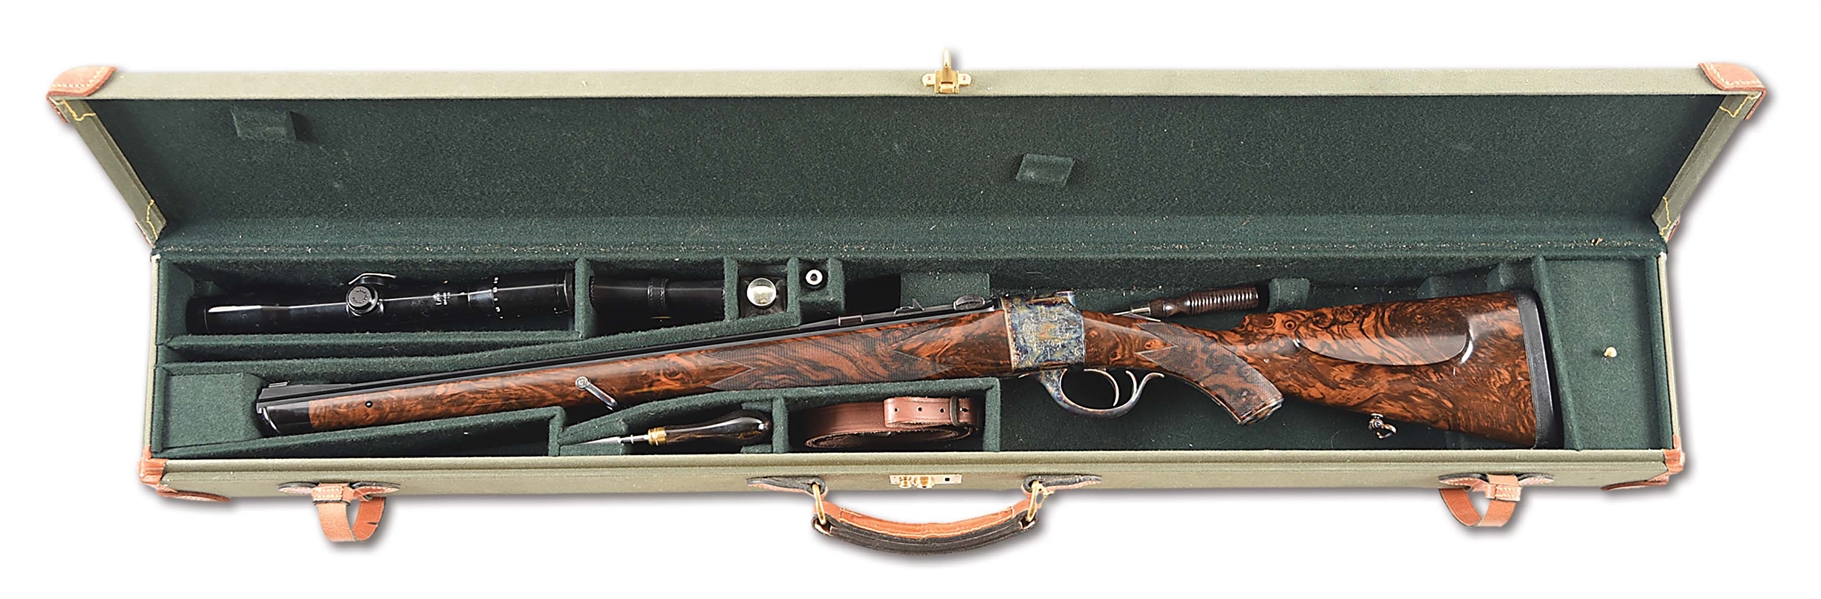 (M) MARTIN HAGN FALLING BLOCK ACTION RIFLE WITH GORGEOUS MANNLICHER STYLE STOCK, CHAMBERED IN DESIRABLE .375 H&H MAGNUM, CASED.